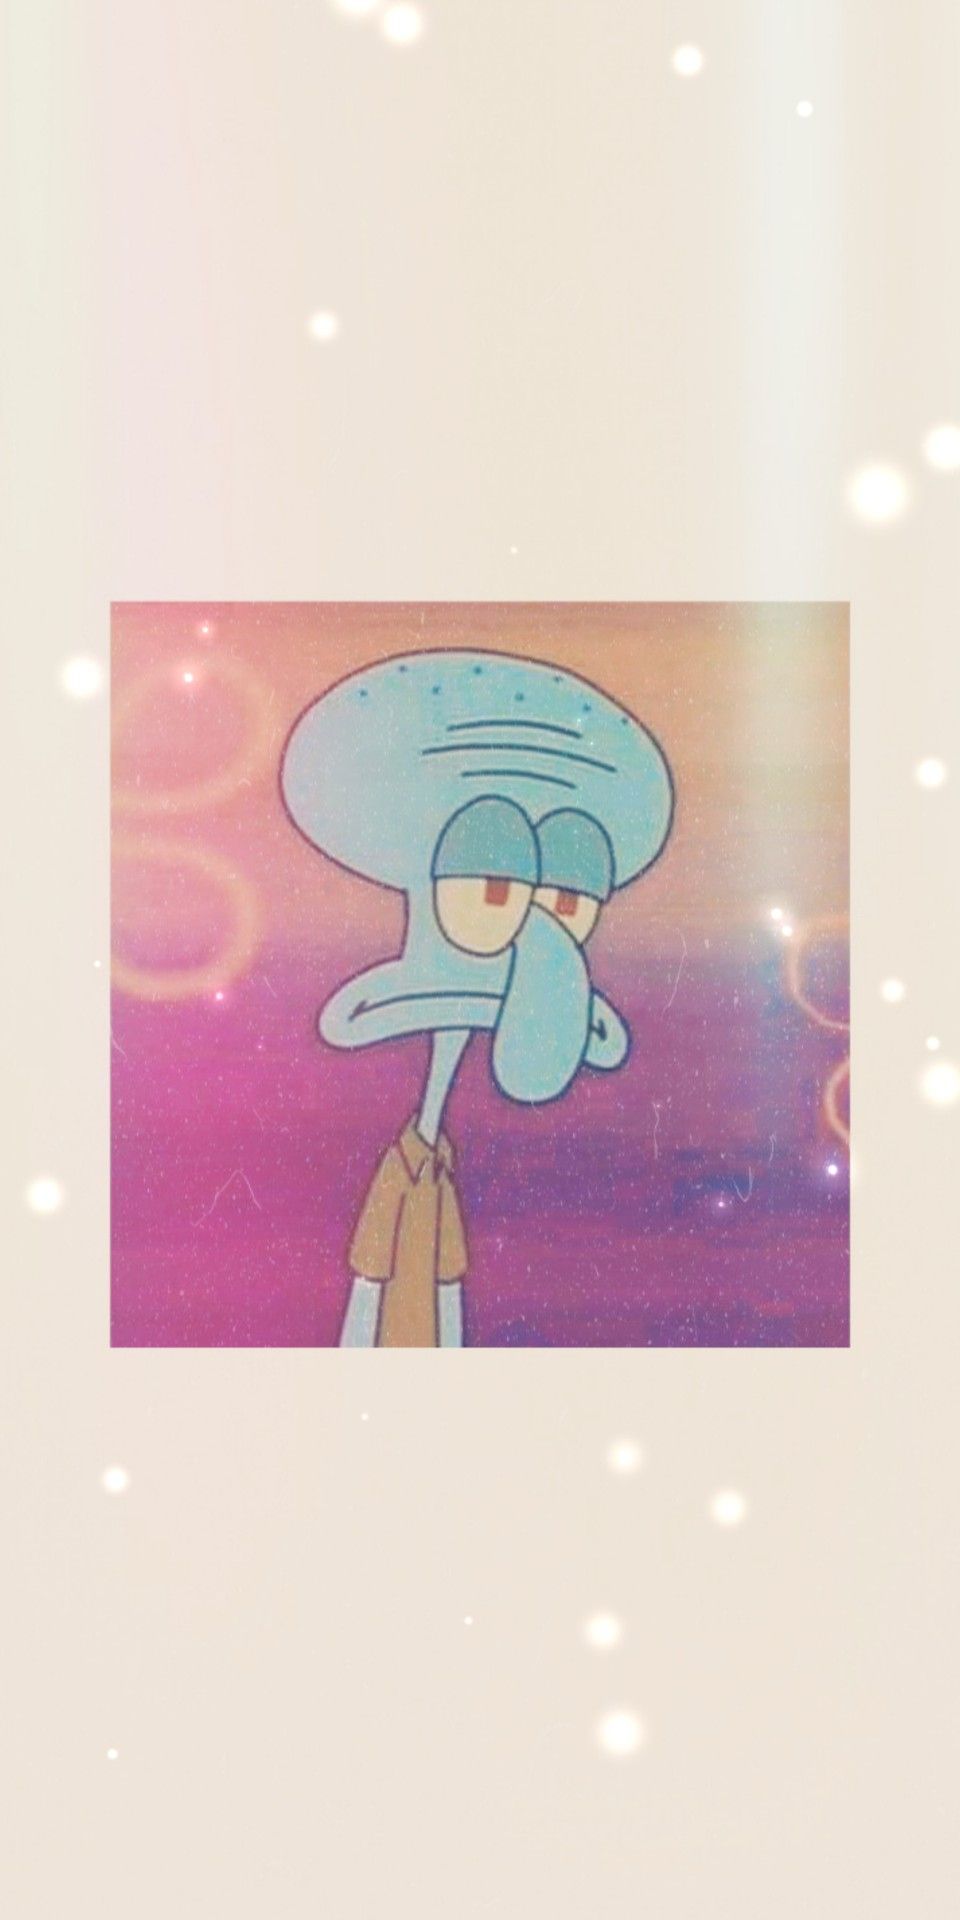 Aesthetic background with Squidward from Spongebob - Squidward